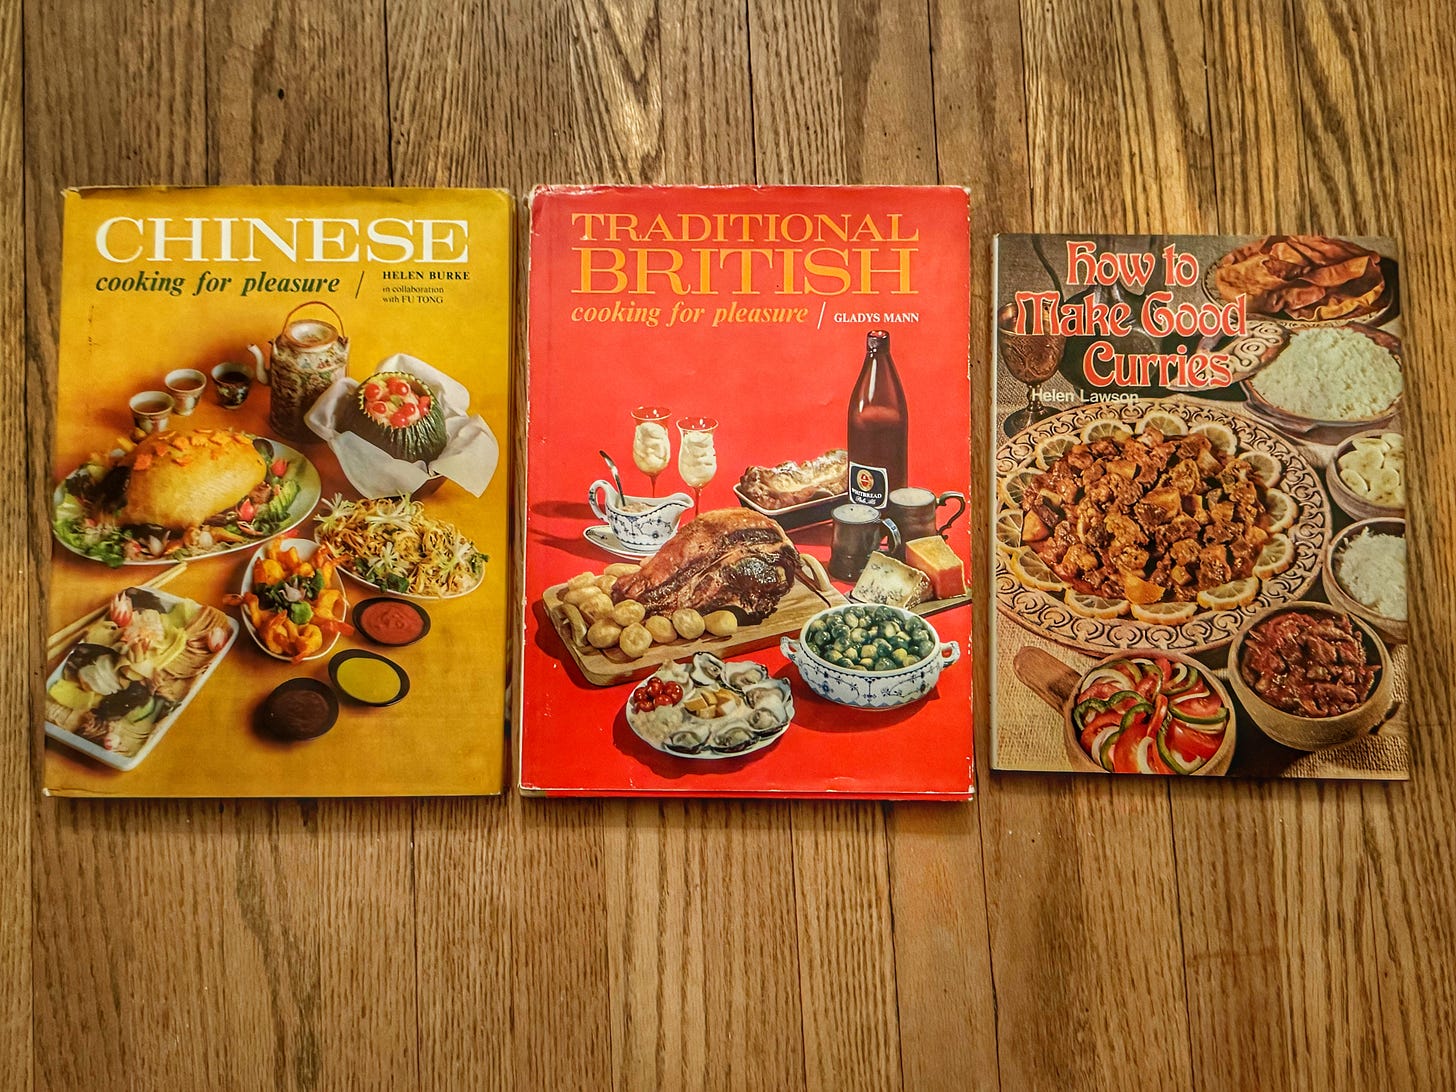 Copies of Chinese Cooking for Pleasure, Traditional British Cooking for Pleasure, and How to Make Good Curries, each showing a variety of dishes from their respective subjects